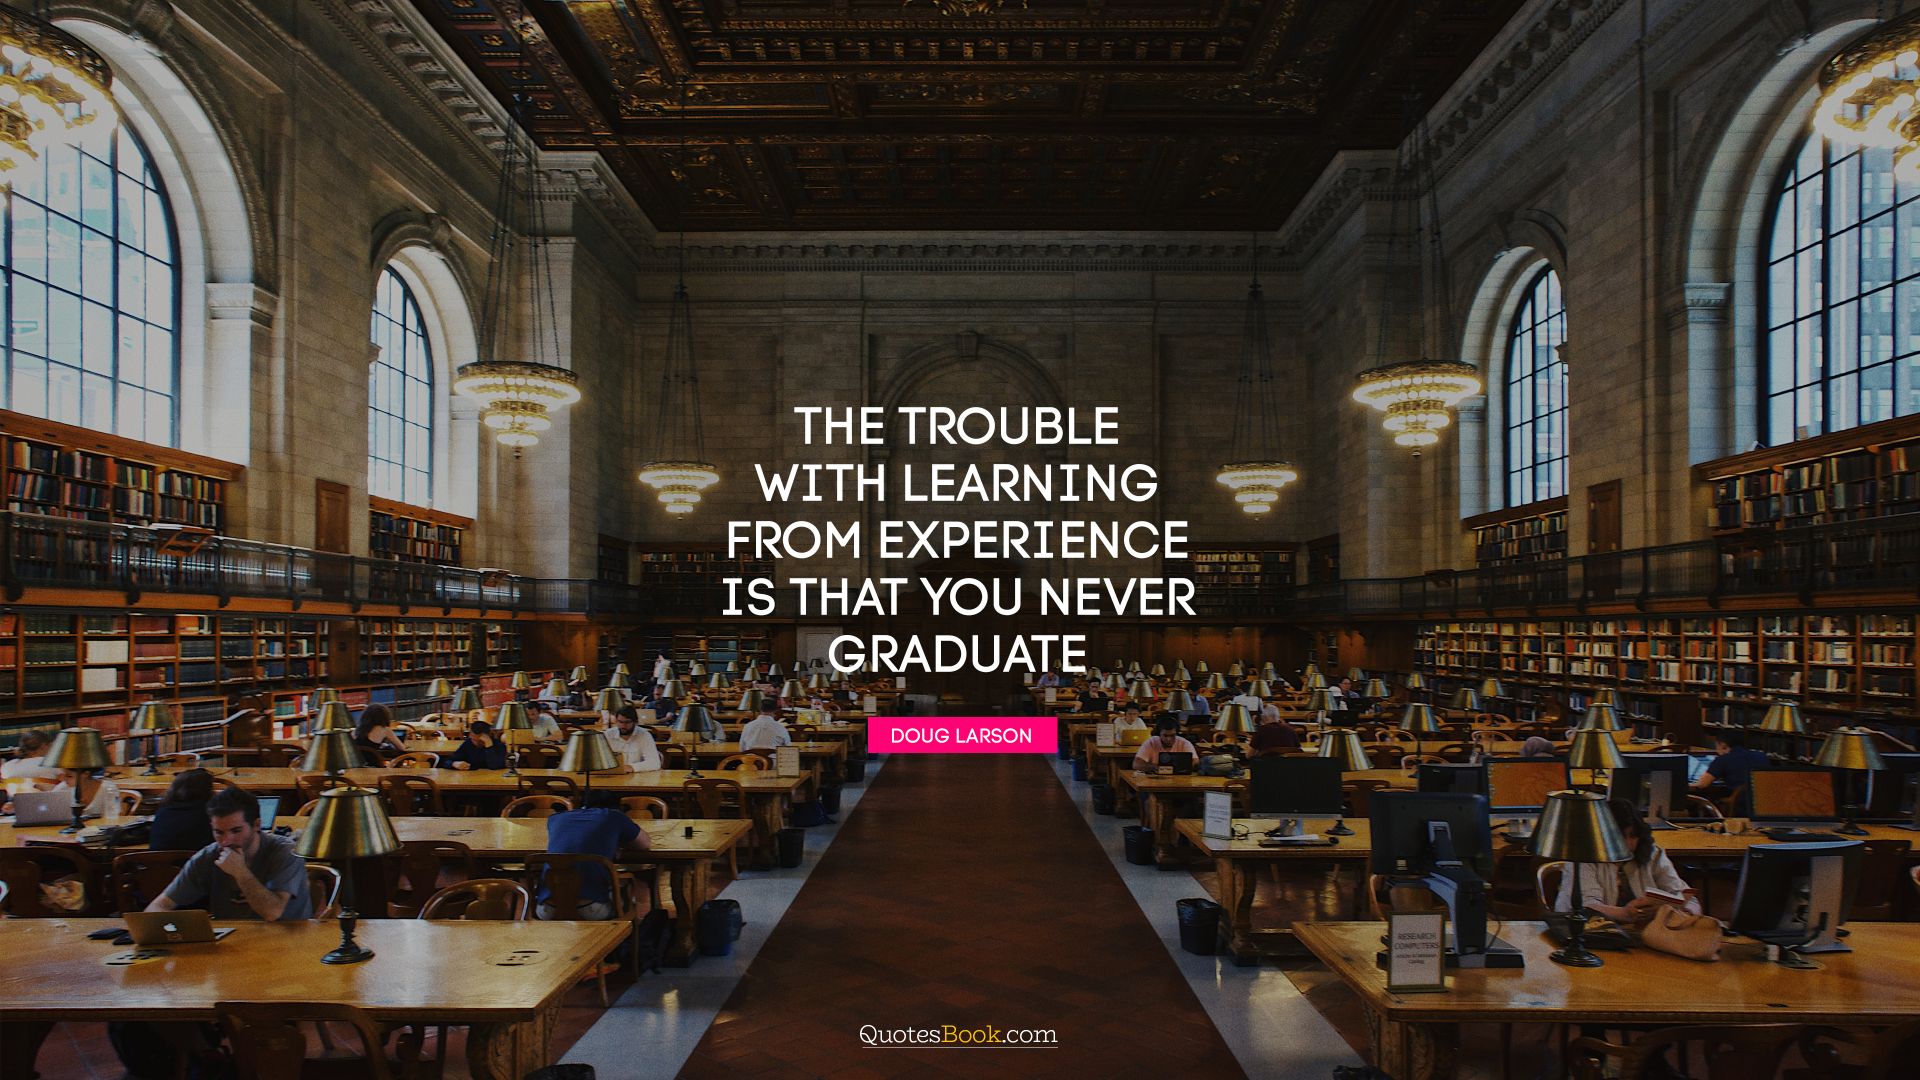 The trouble with learning from experience is that you never graduate. - Quote by Doug Larson